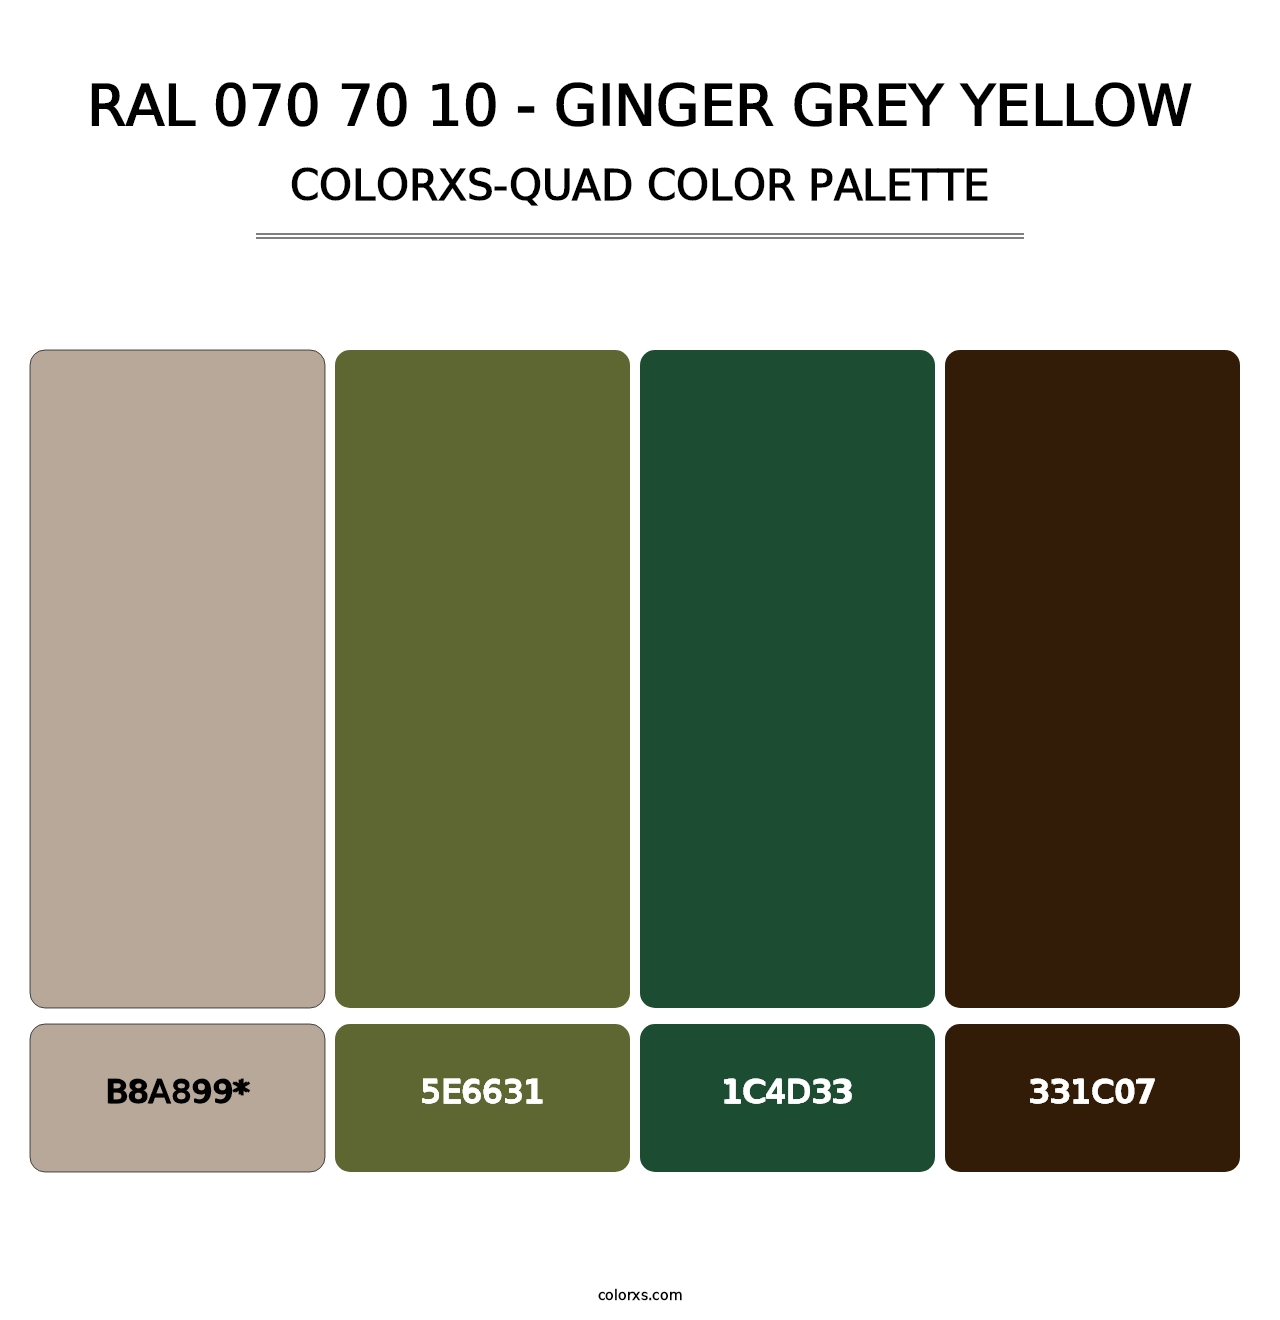 RAL 070 70 10 - Ginger Grey Yellow - Colorxs Quad Palette